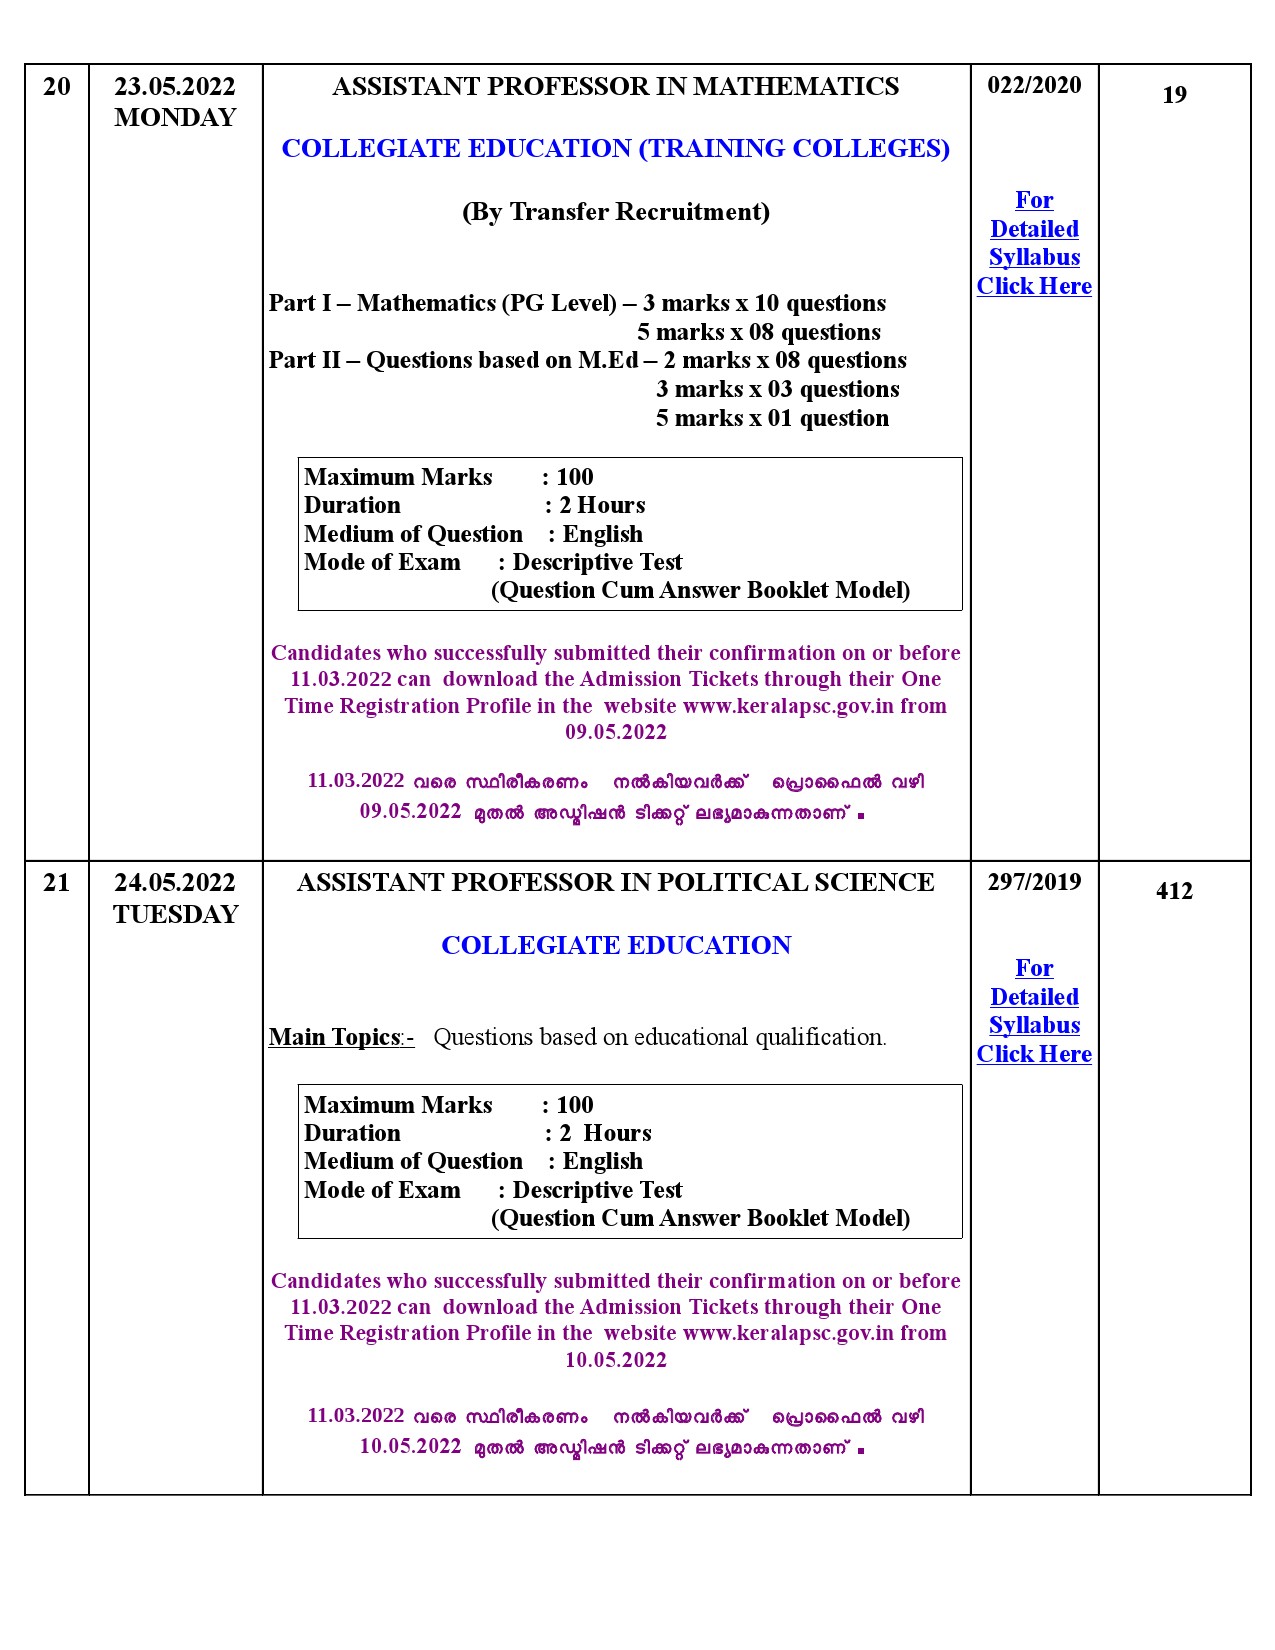 KPSC EXAMINATION PROGRAMME FOR THE MONTH OF MAY 2022 - Notification Image 10